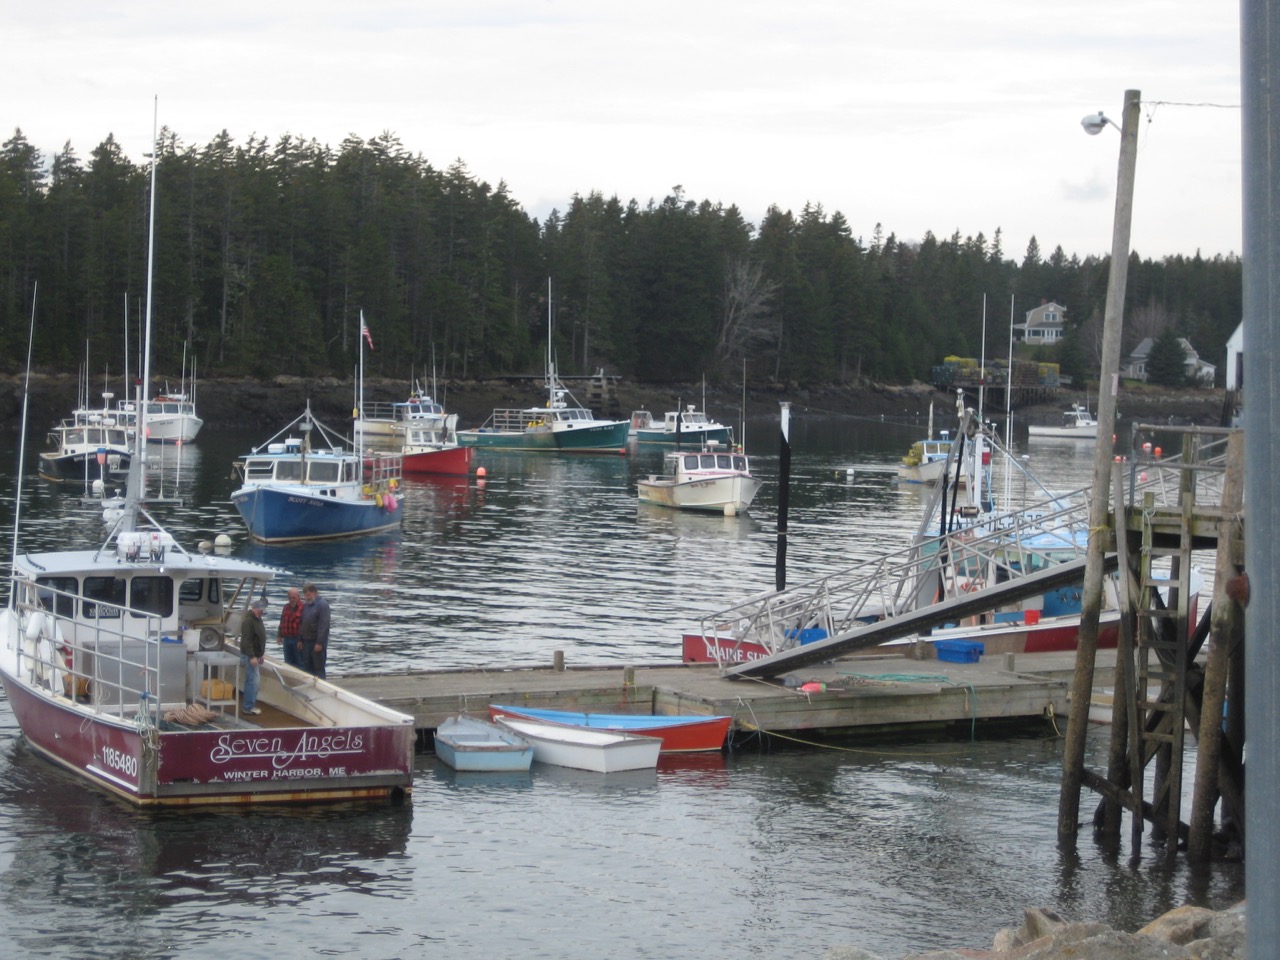 a photo of several boats docked in a harbor